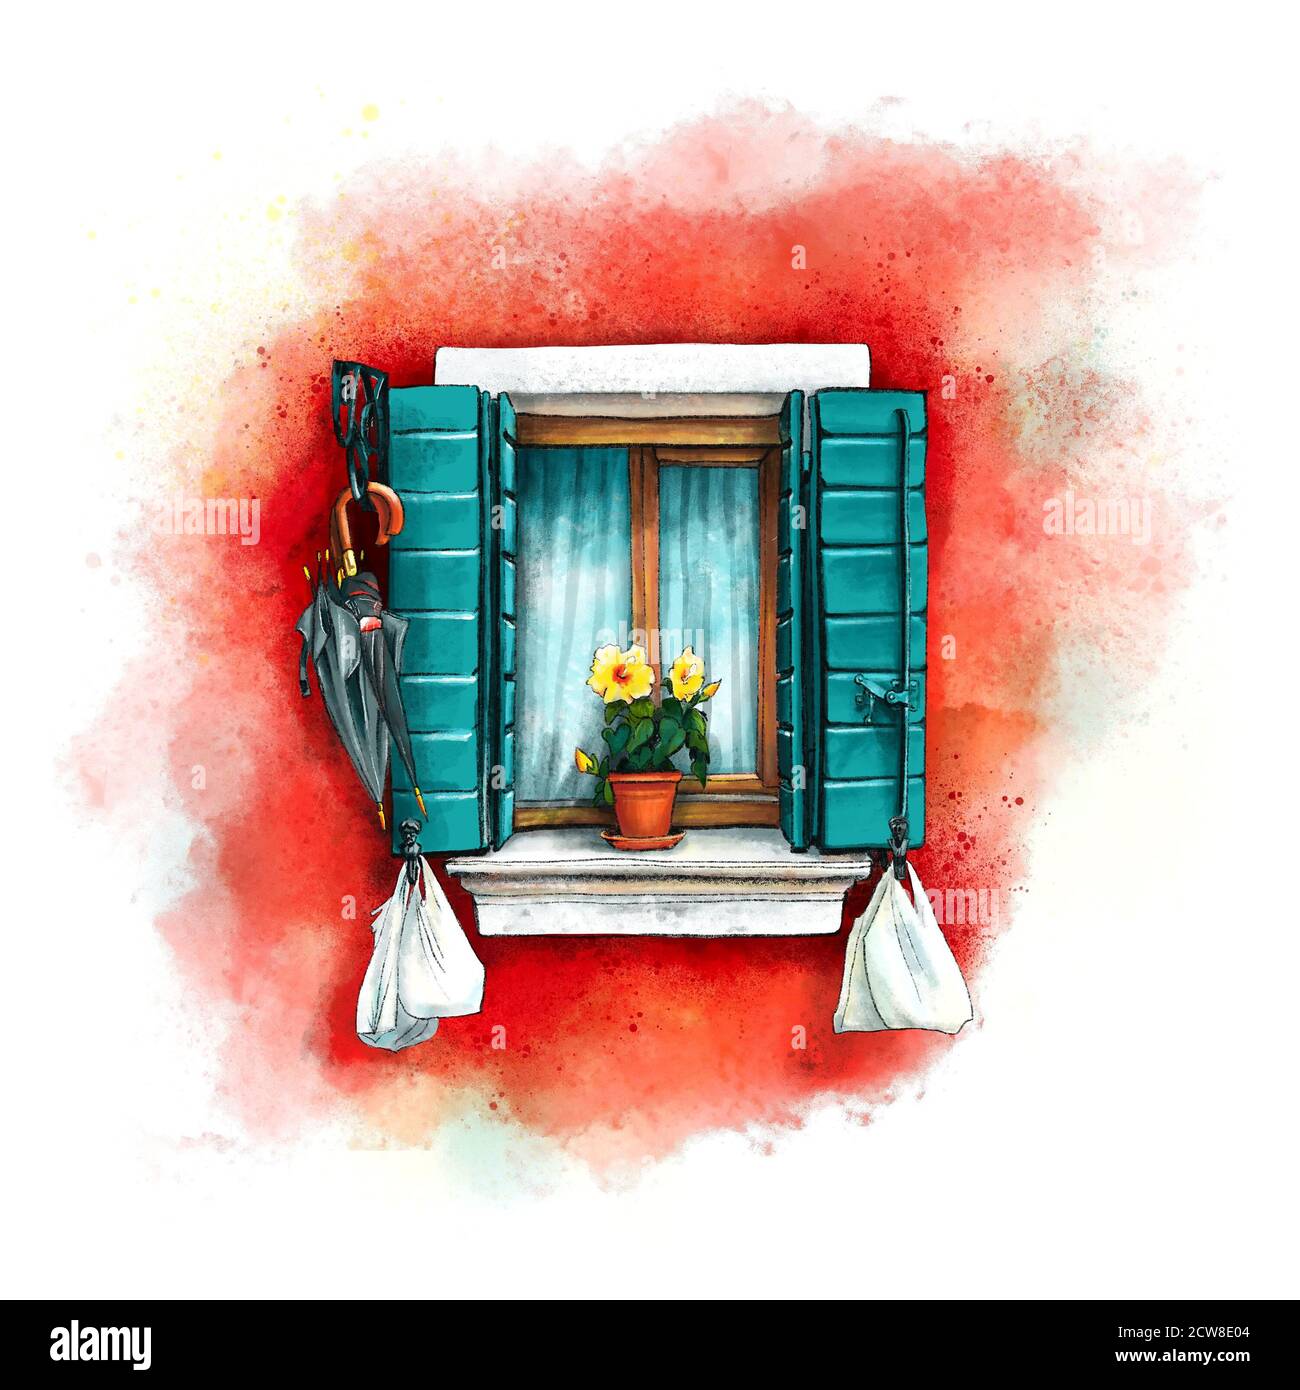 Window with green shutters and yellow flowers on red wall of houses on island Burano, Venice, Italy. Digital drawing as watercolor Stock Photo